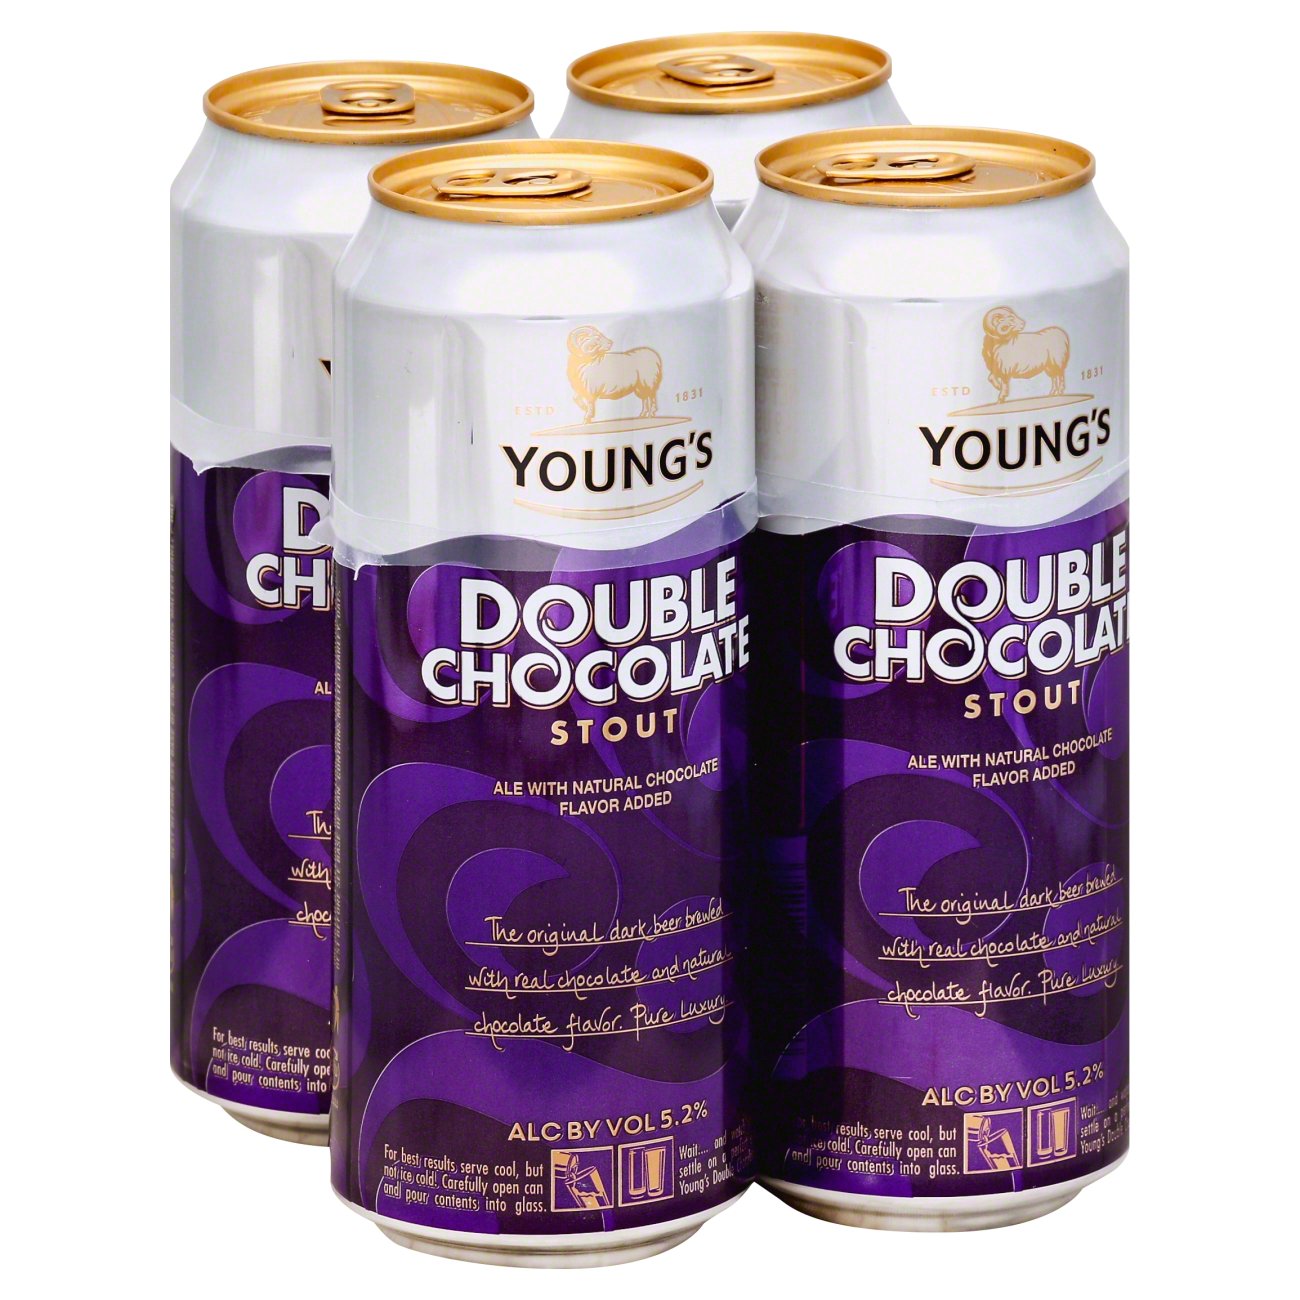 Youngs Double Chocolate Stout Beer 14 9 Oz Cans Shop Beer At H E B